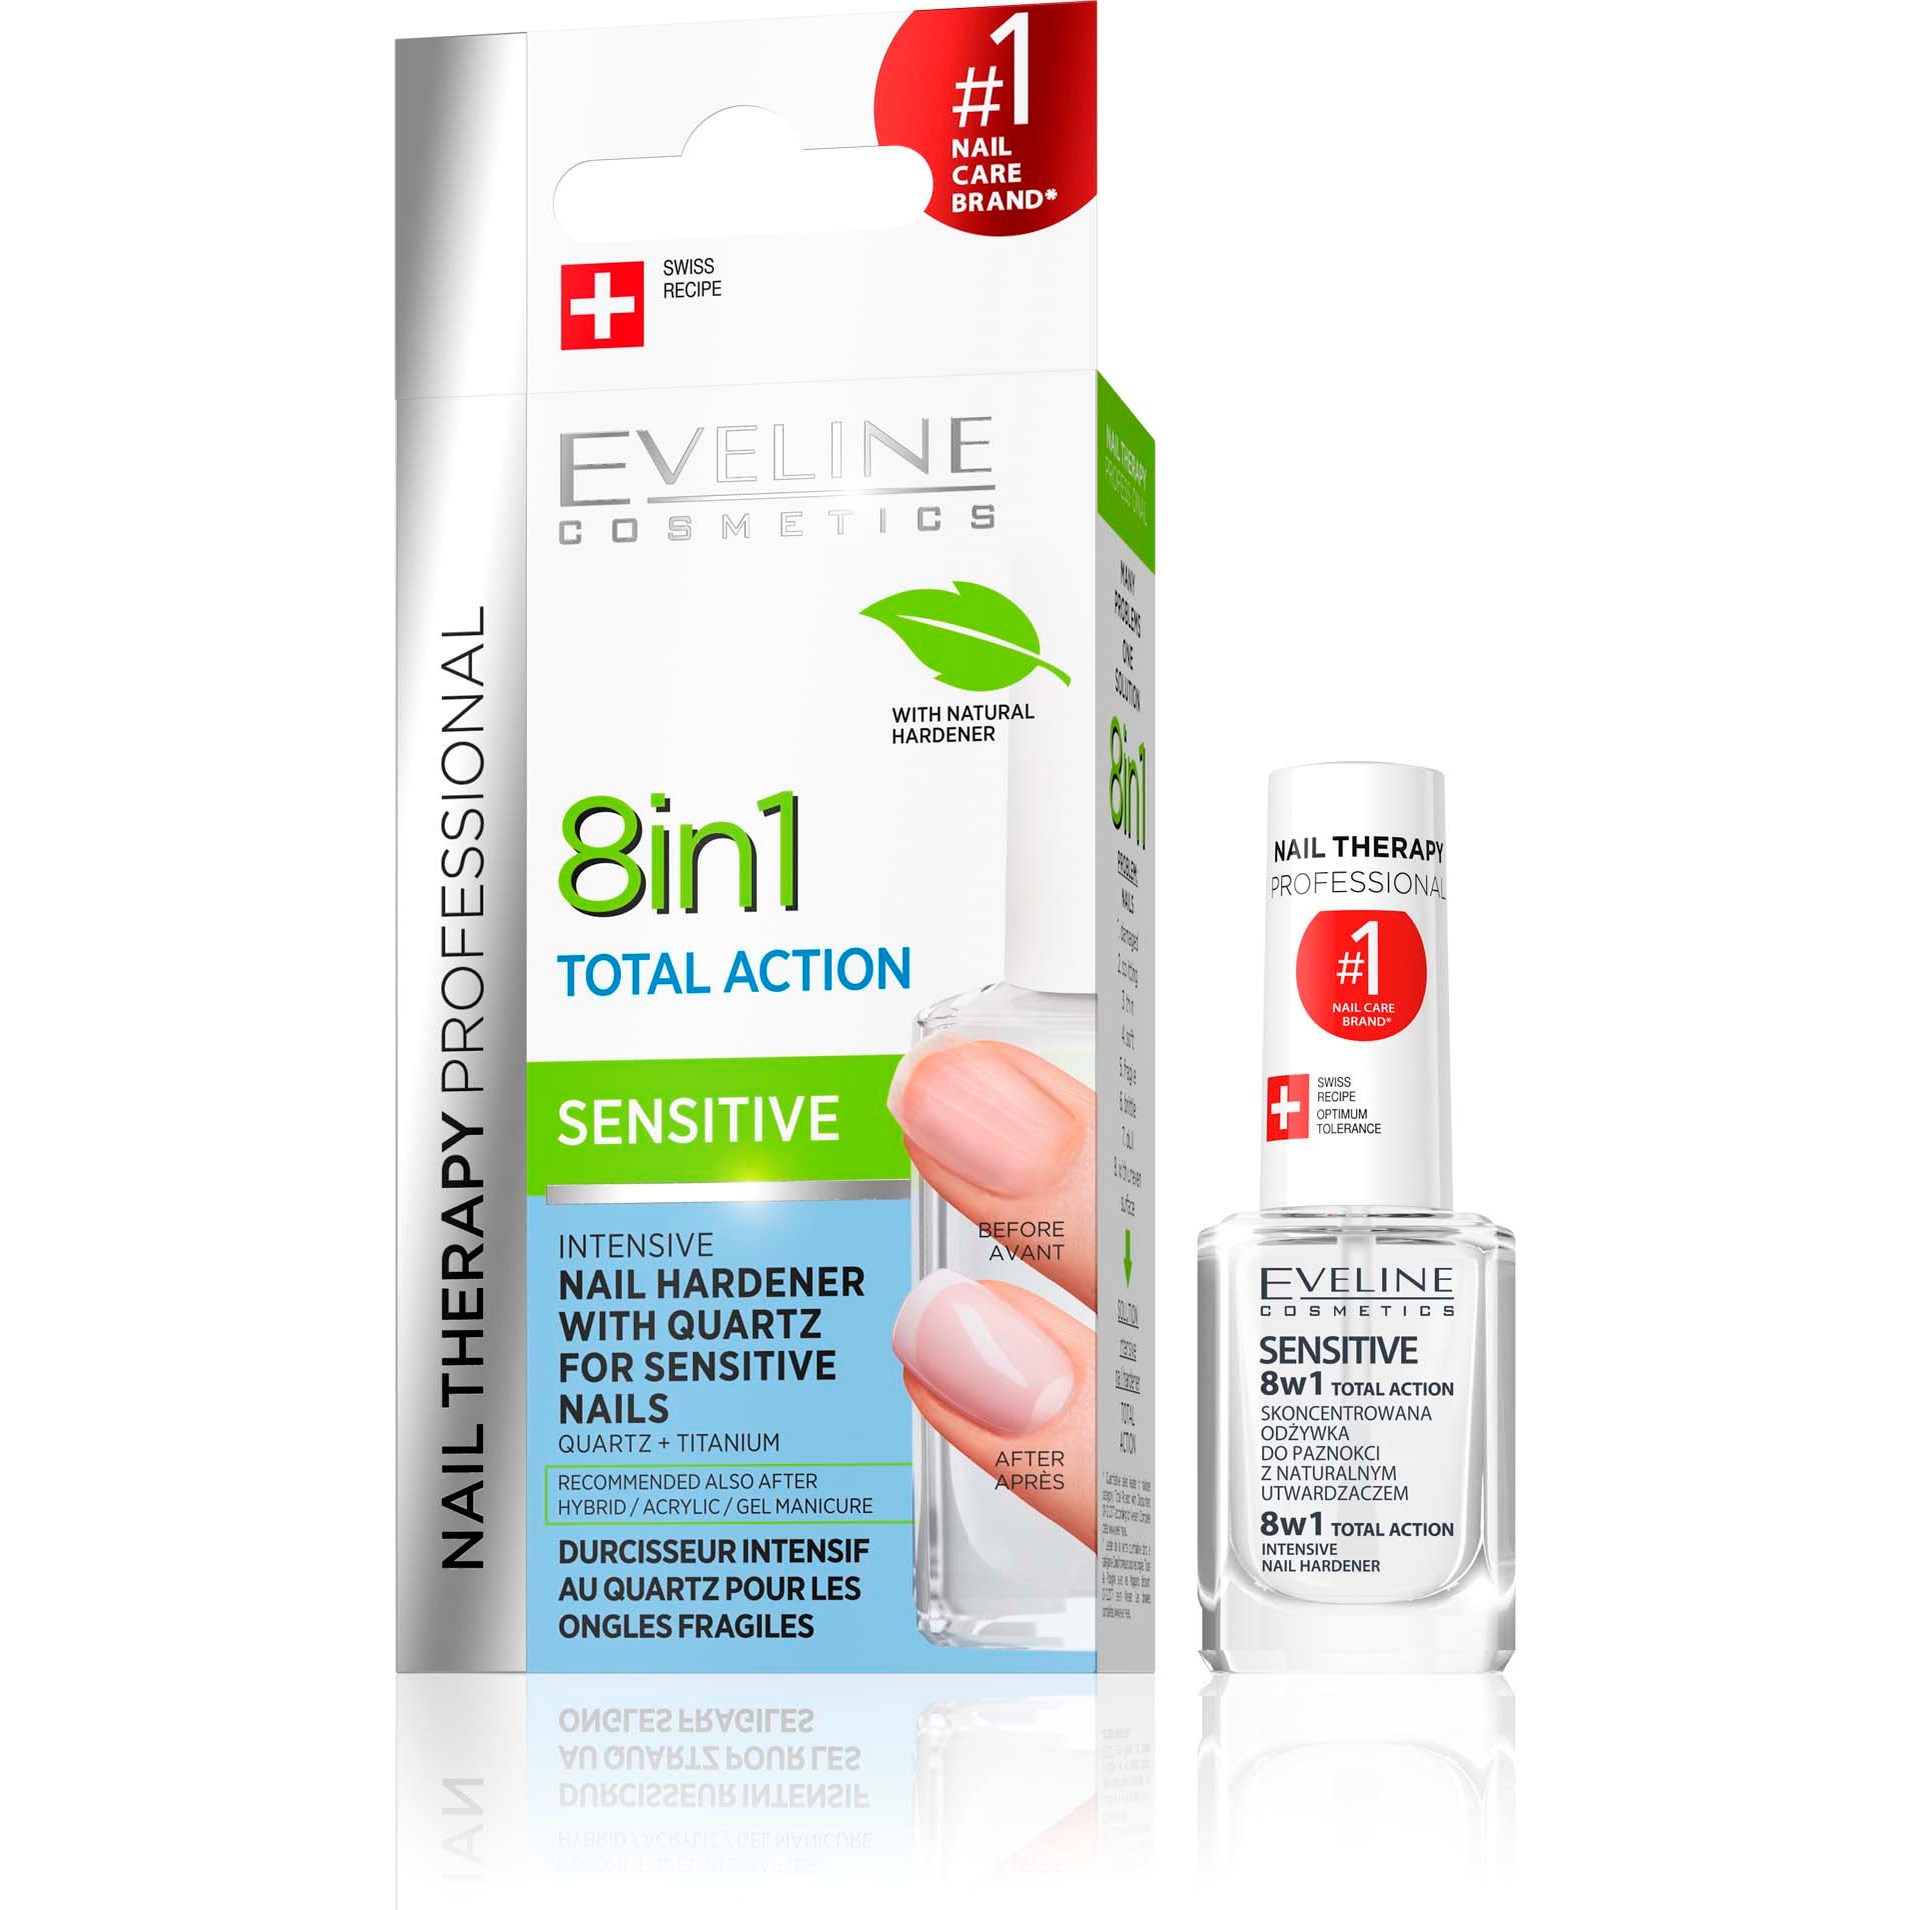 Bilde av Eveline Cosmetics Nail Therapy Professional Total Action 8 In 1 Sensit